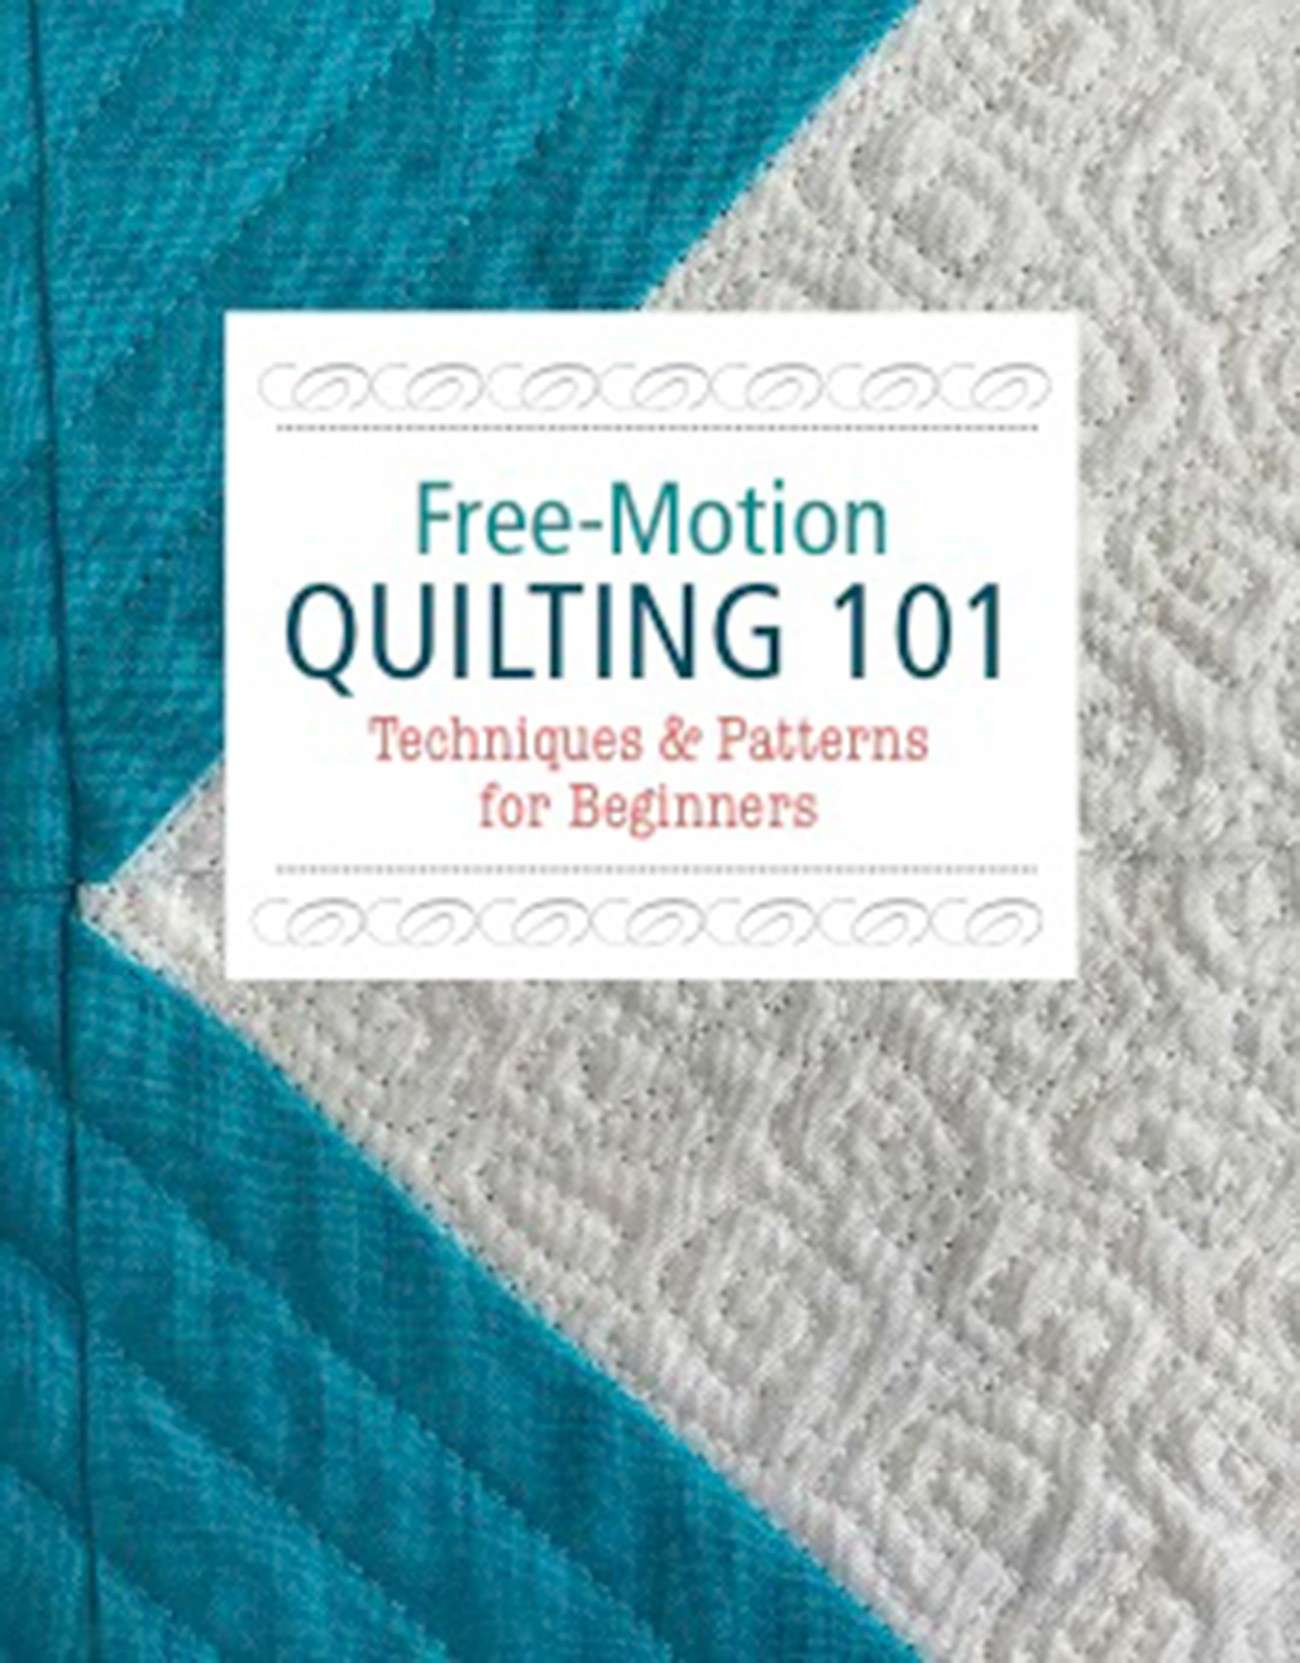 Free Motion Quilting 101